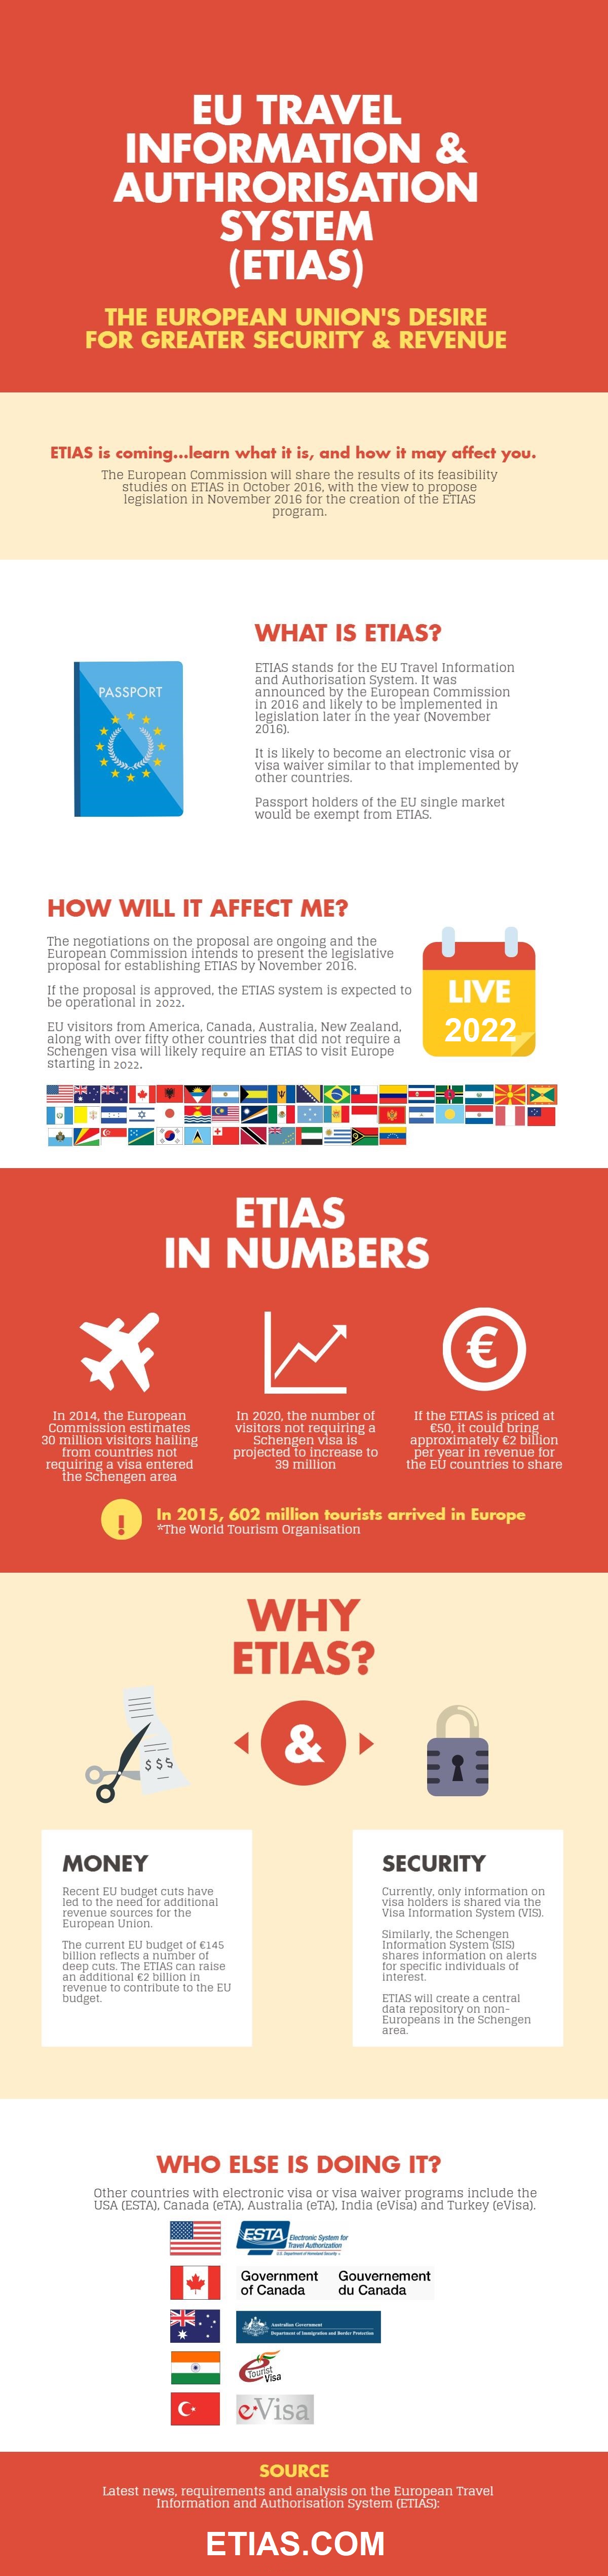 Important information about the new European visa waiver known as ETIAS (European Travel Information and Authorisation System)